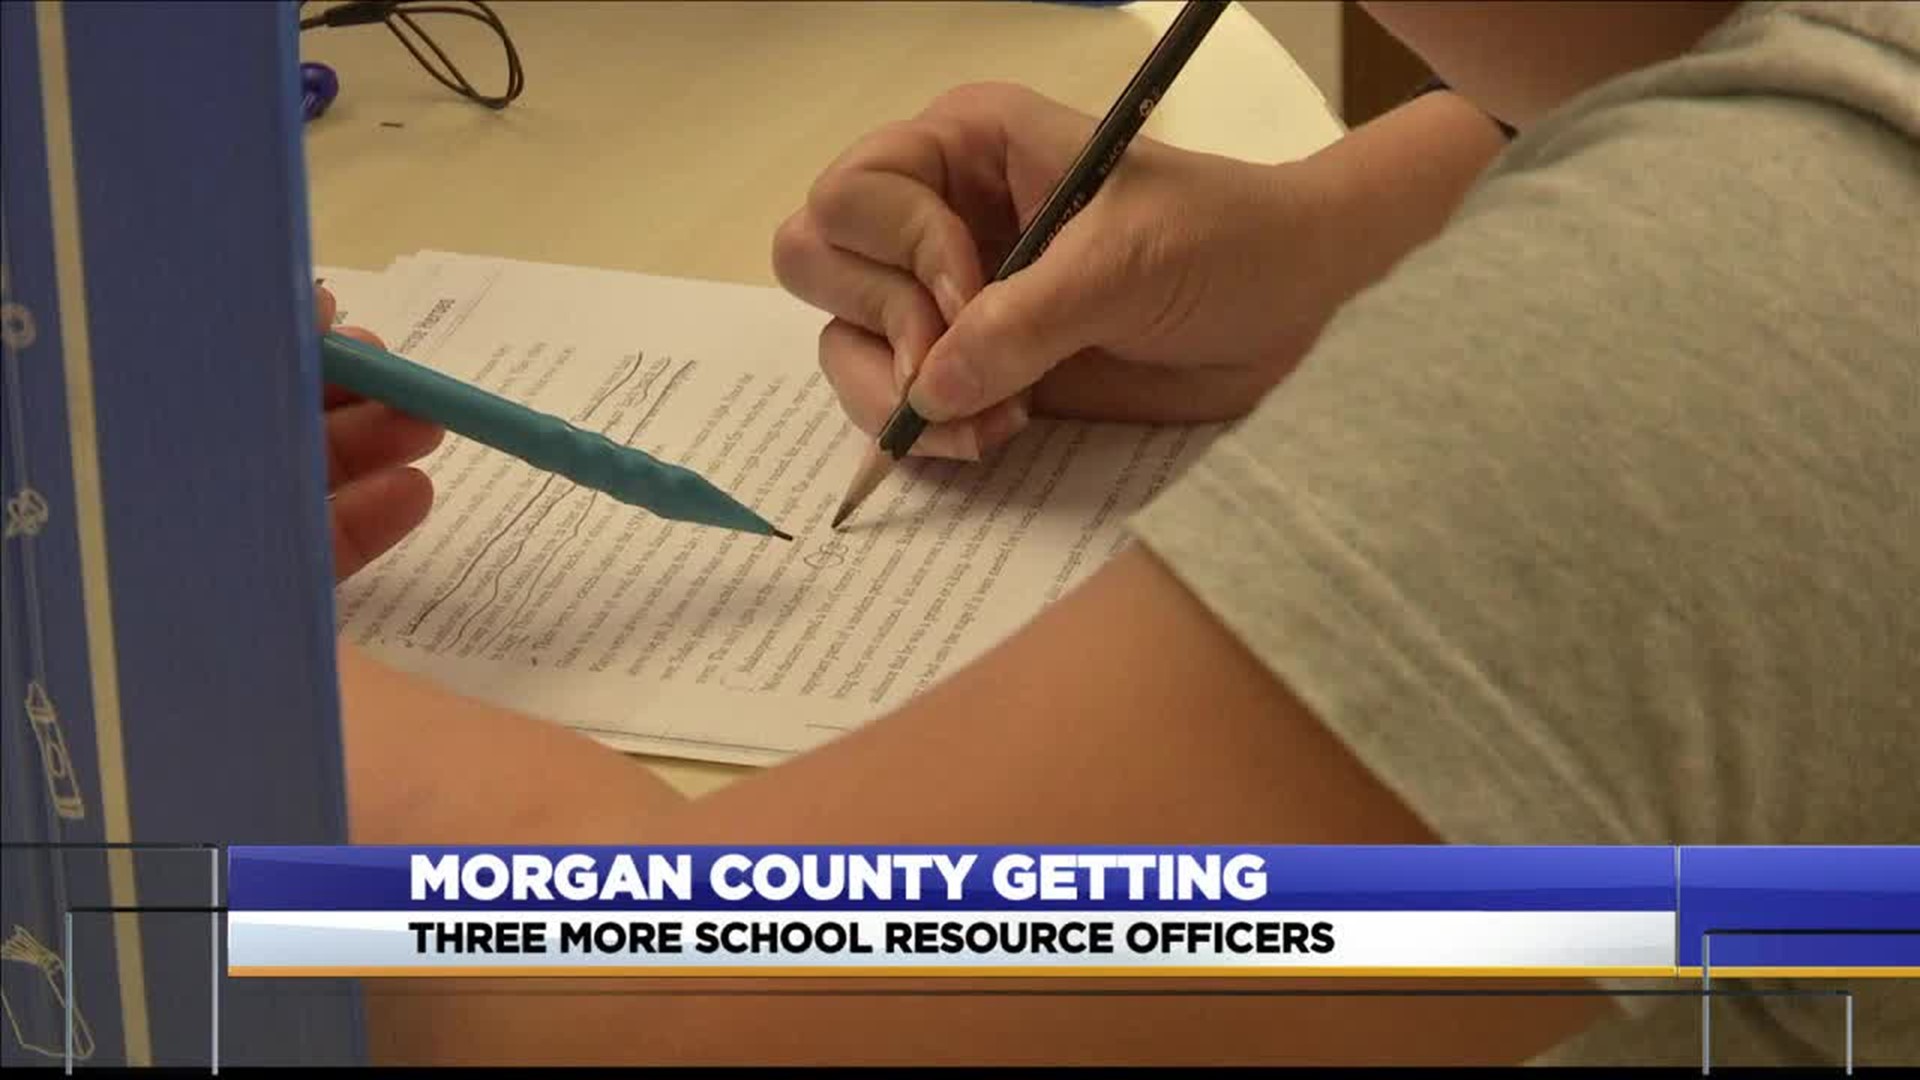 Morgan County Schools are getting three more resource officers.